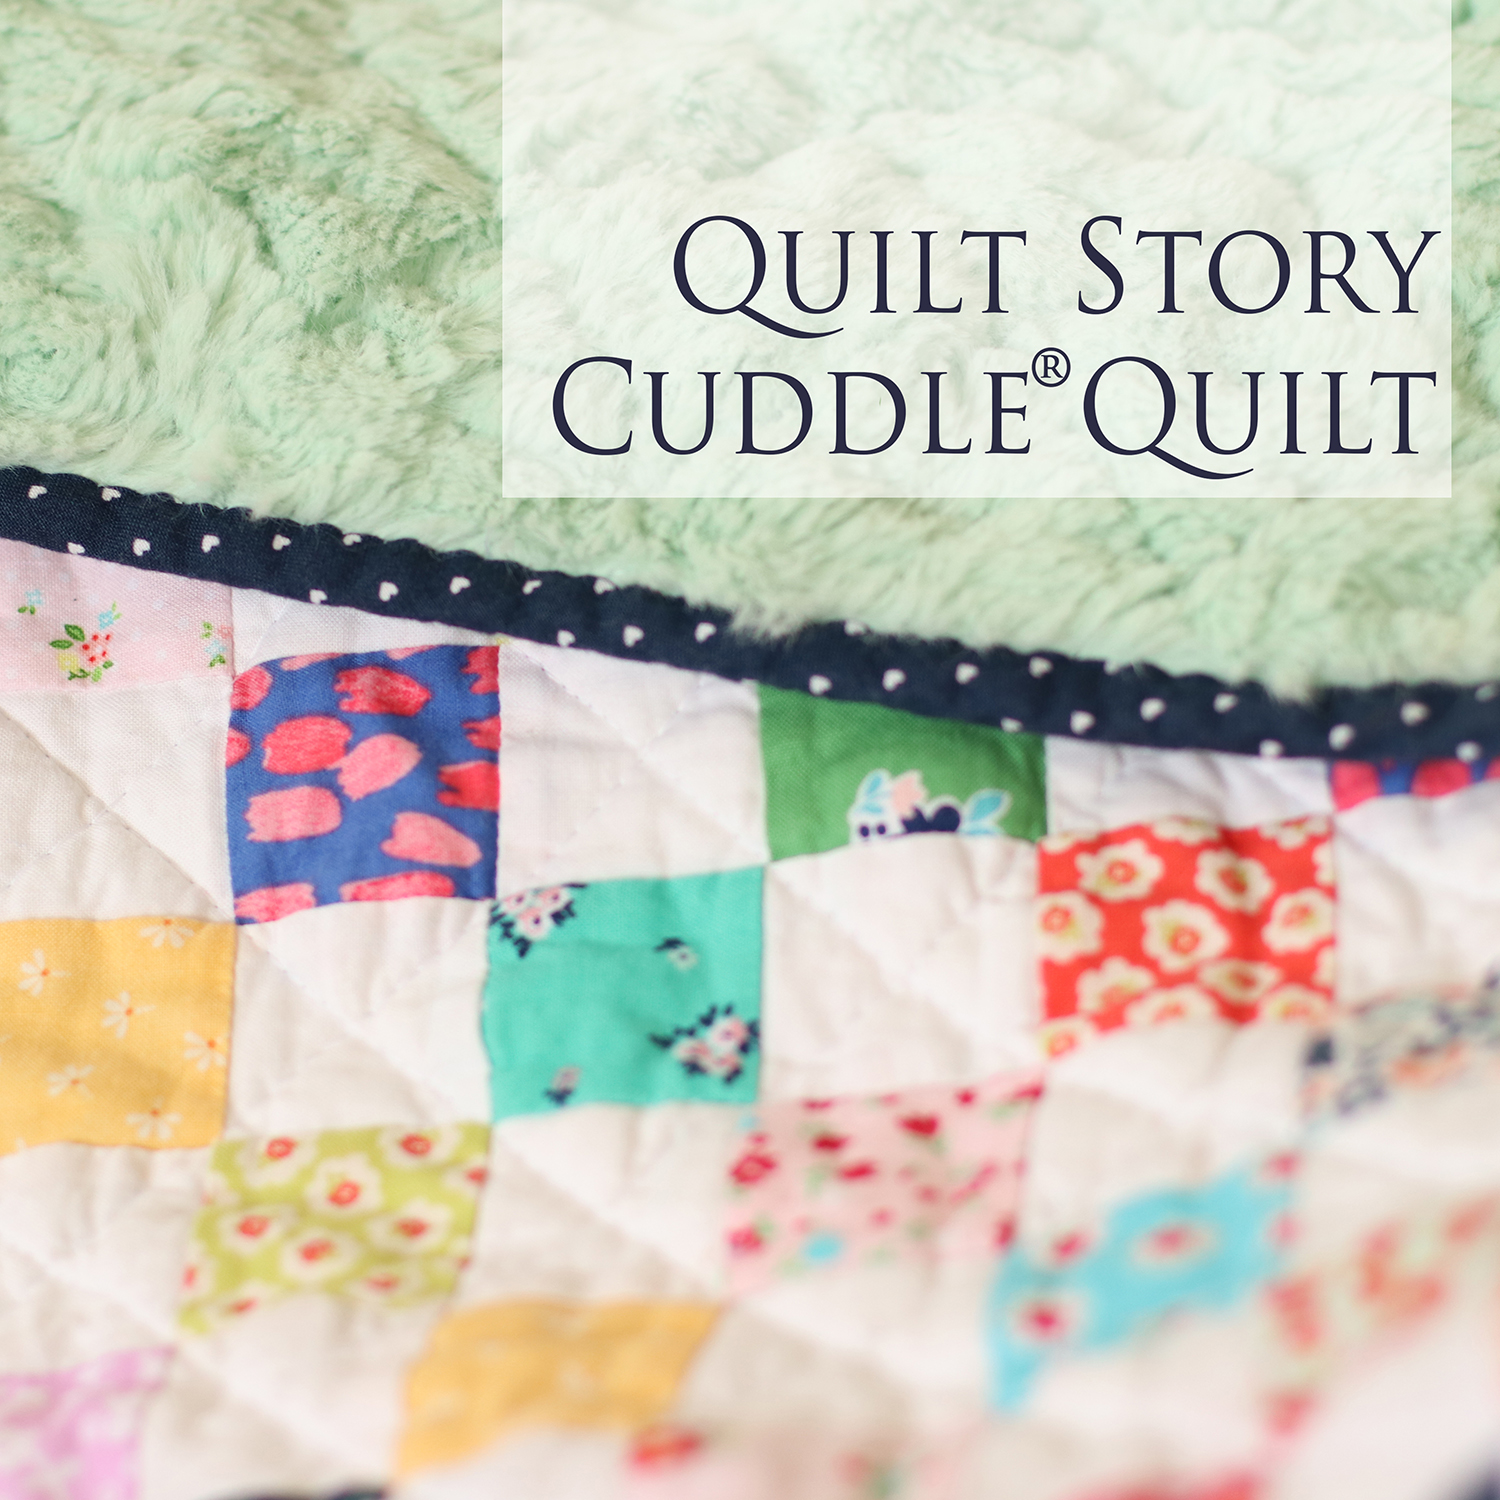 Introducing June Tailor® Quilt As You Go™ Sewing Kits and More